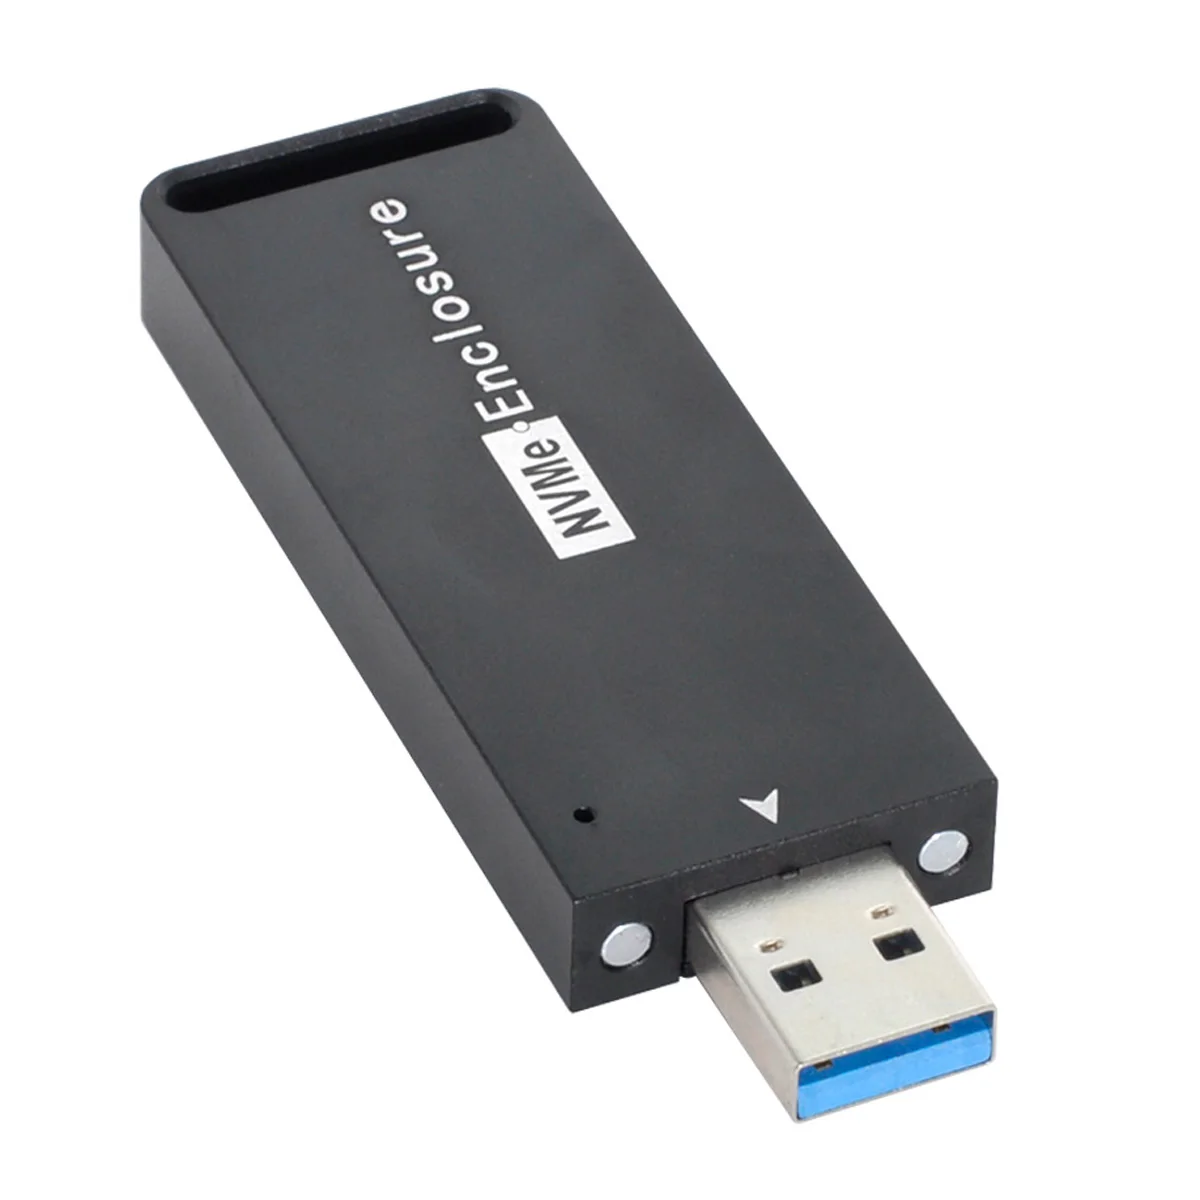 

Jimier CY USB 3.1 Gen2 10Gbps to NVME PCI-E M-Key Solid State Drive External Enclosure 2230/2242mm